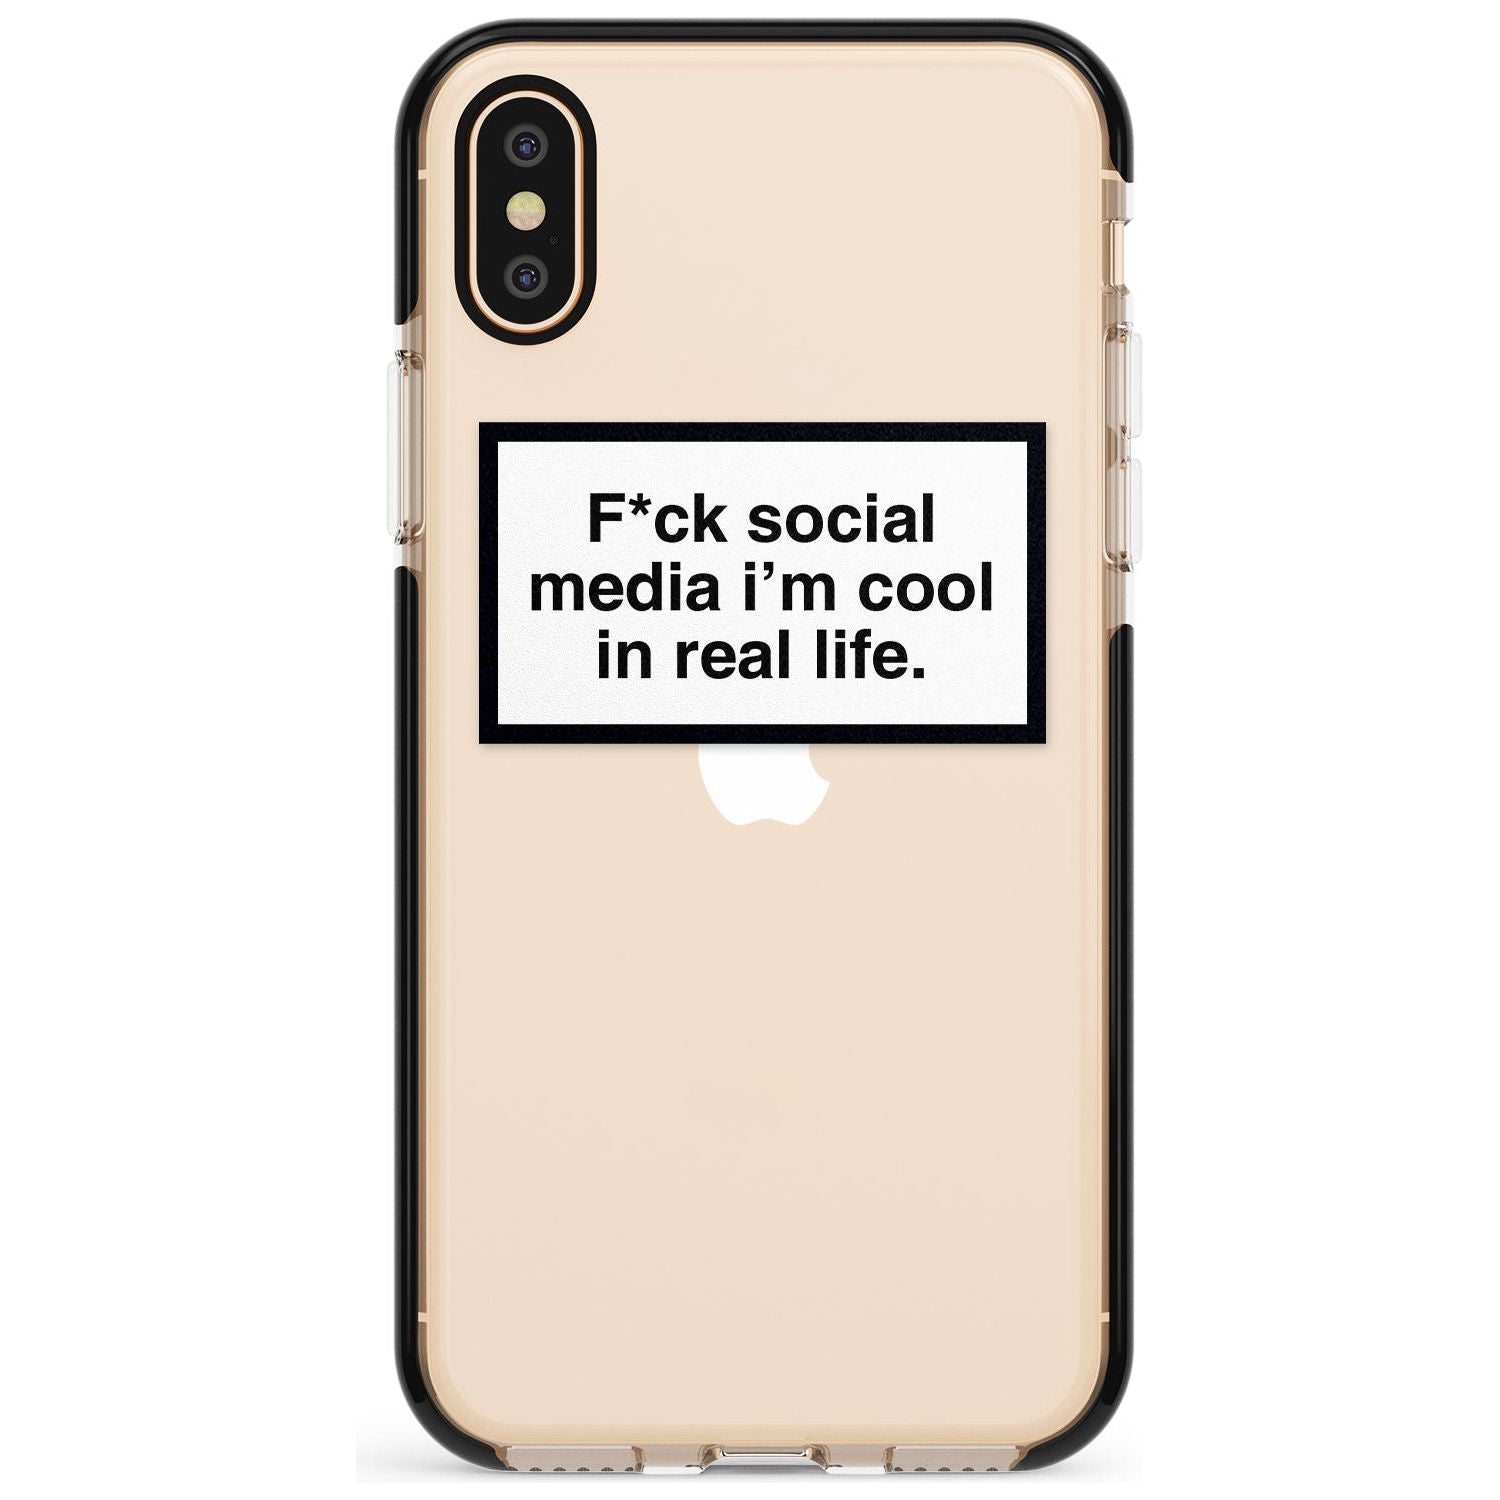 F*ck social media I'm cool in real life Pink Fade Impact Phone Case for iPhone X XS Max XR